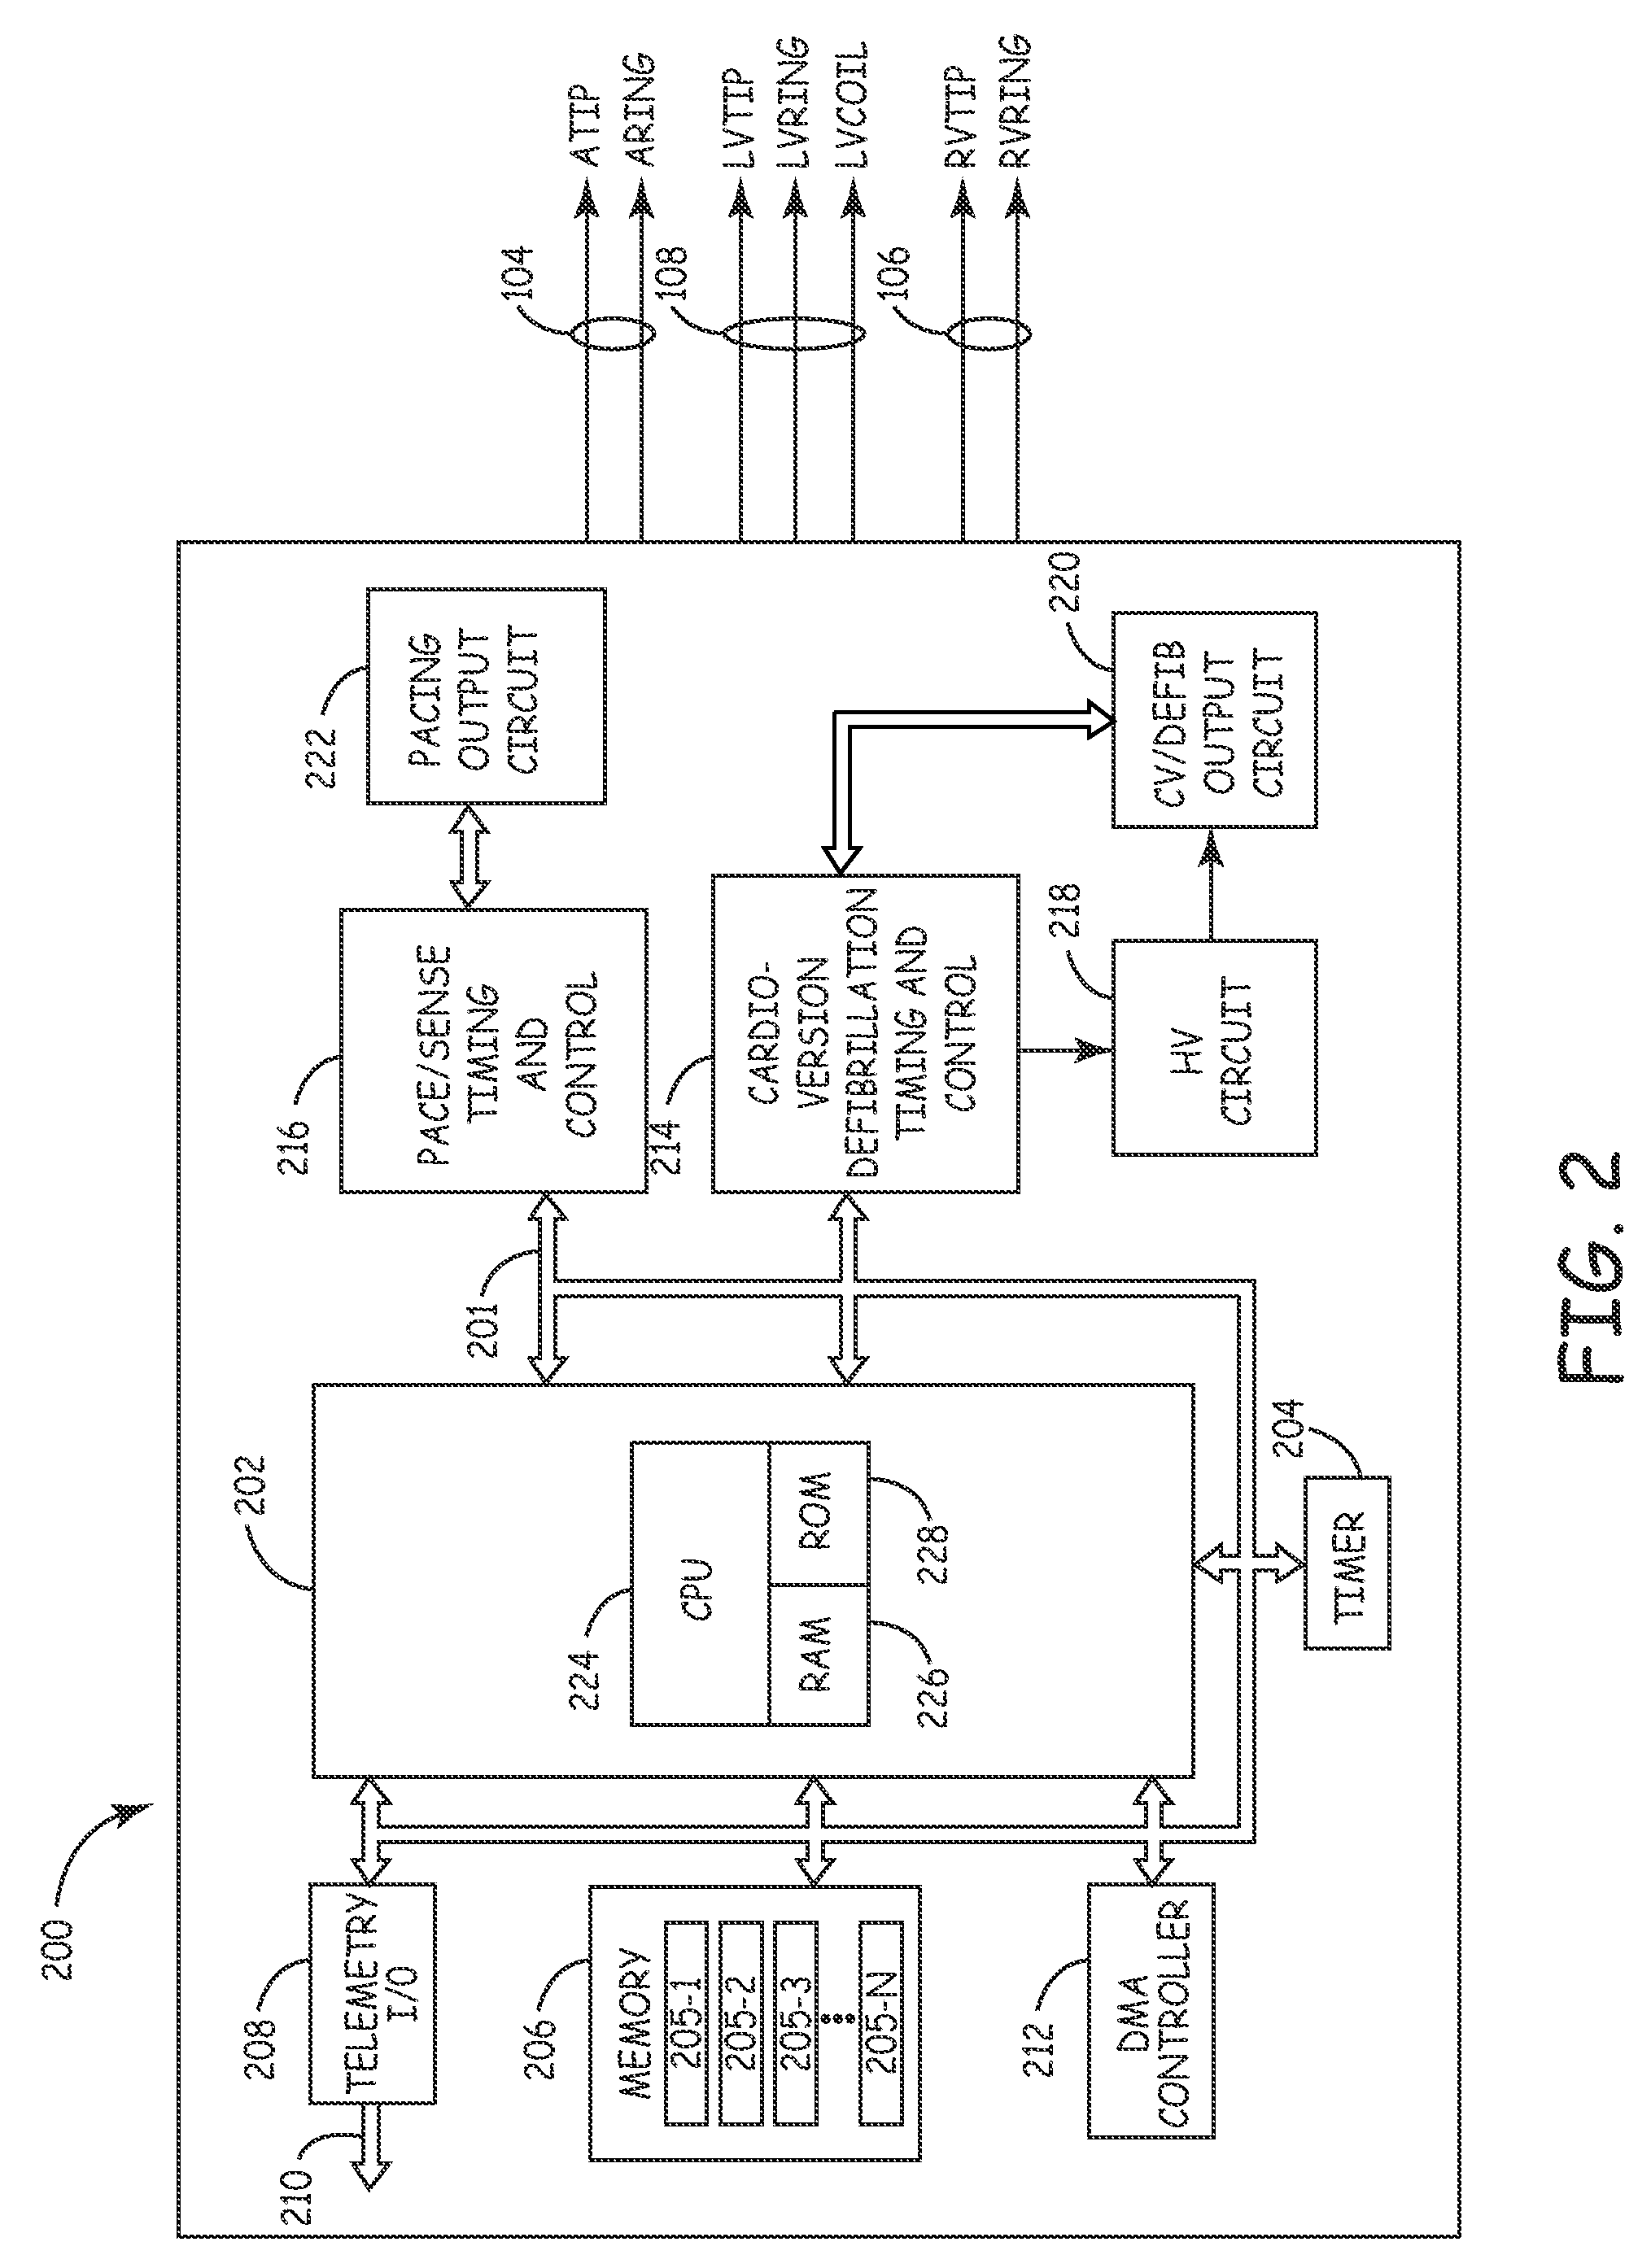 Communication system for medical devices